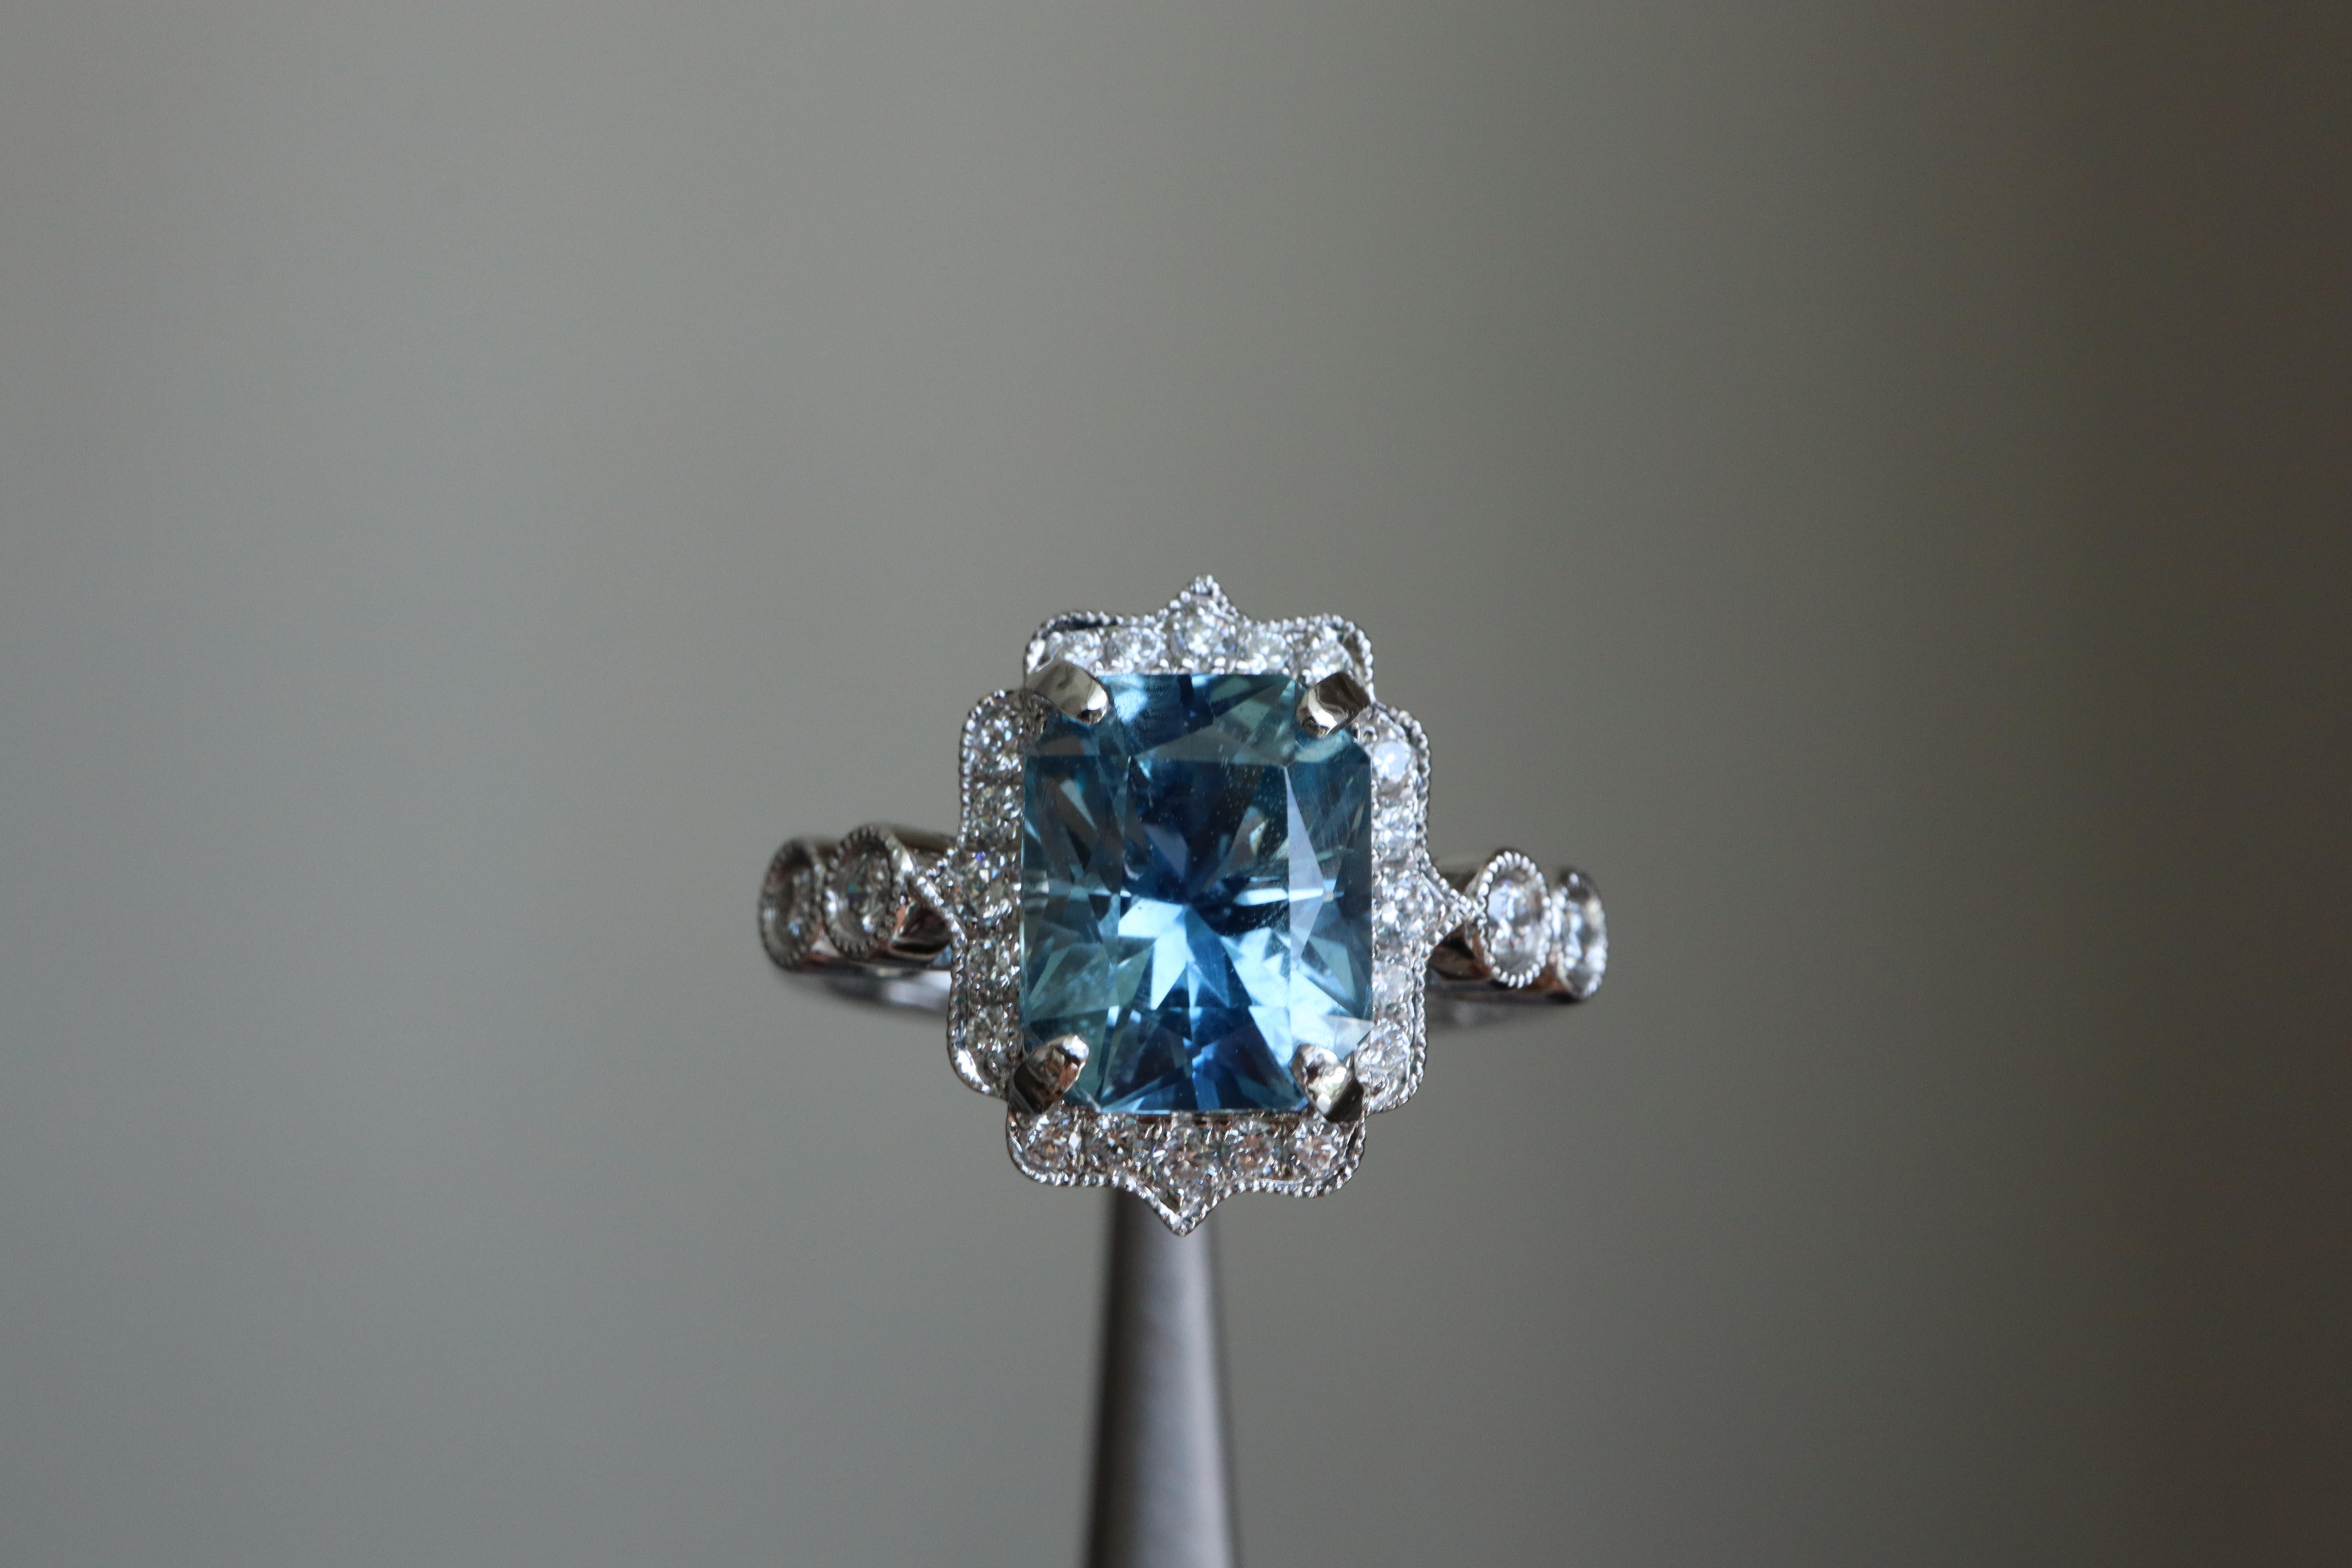 GIA Certified Burma Origin Unheated 2.61Ct Pastel Teal Blue Sapphire Ring 

The gentle and classy color of the stone, highly transparent and with just the right sparkle, complements jeans or pastel-colored clothing. Crafted in 18k solid gold with